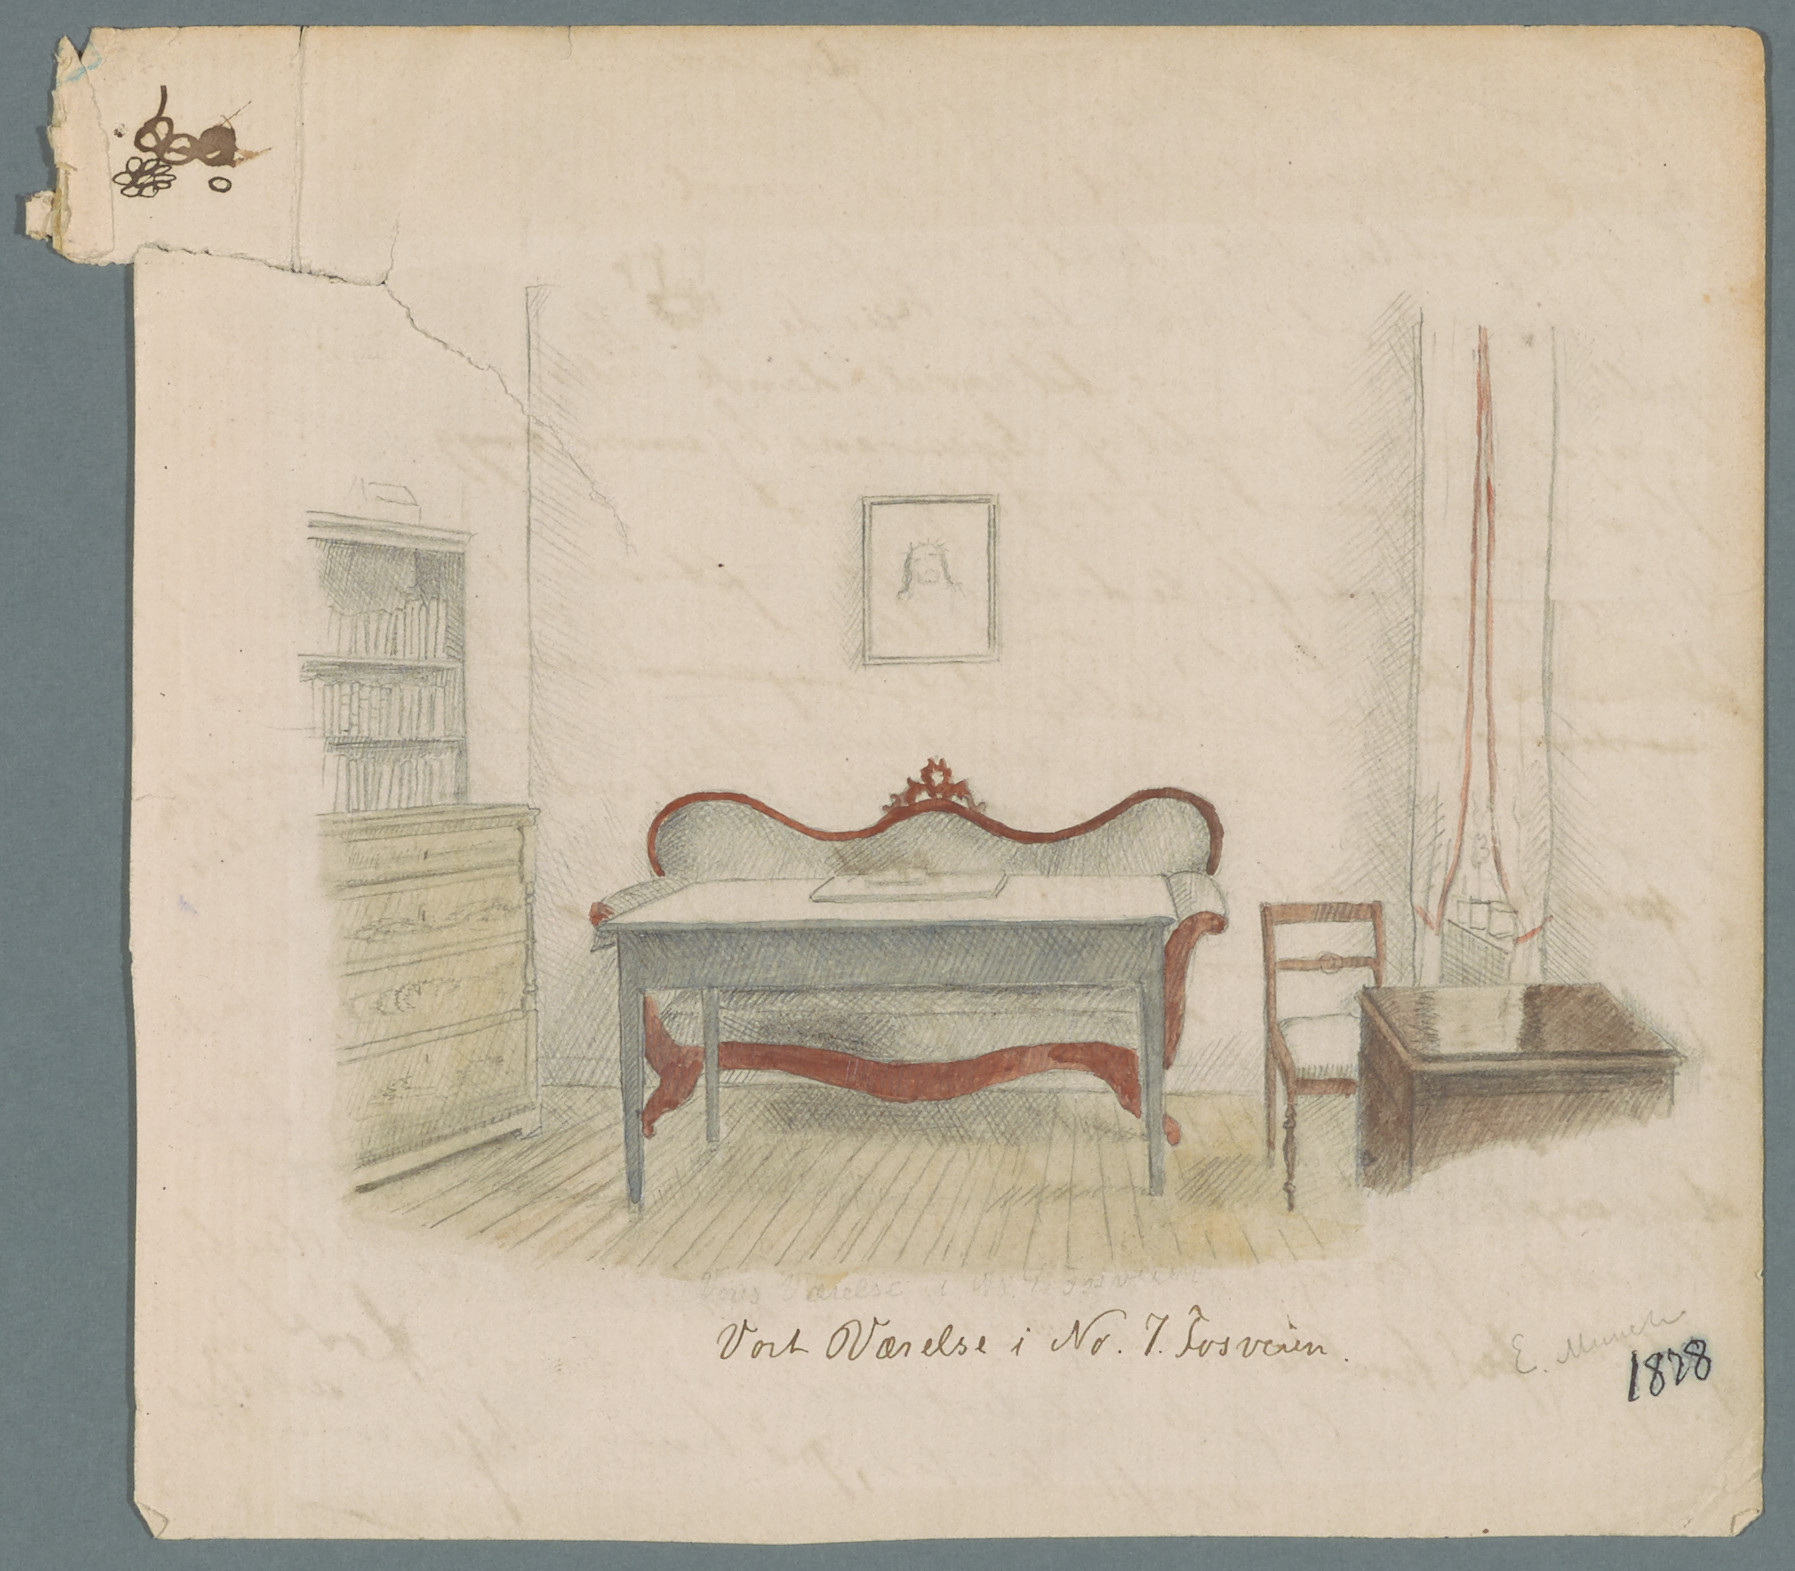 Edvard Munch: Our Room in No 13 Fossveien. Pencil and watercolour, 1878. Photo © Munchmuseet